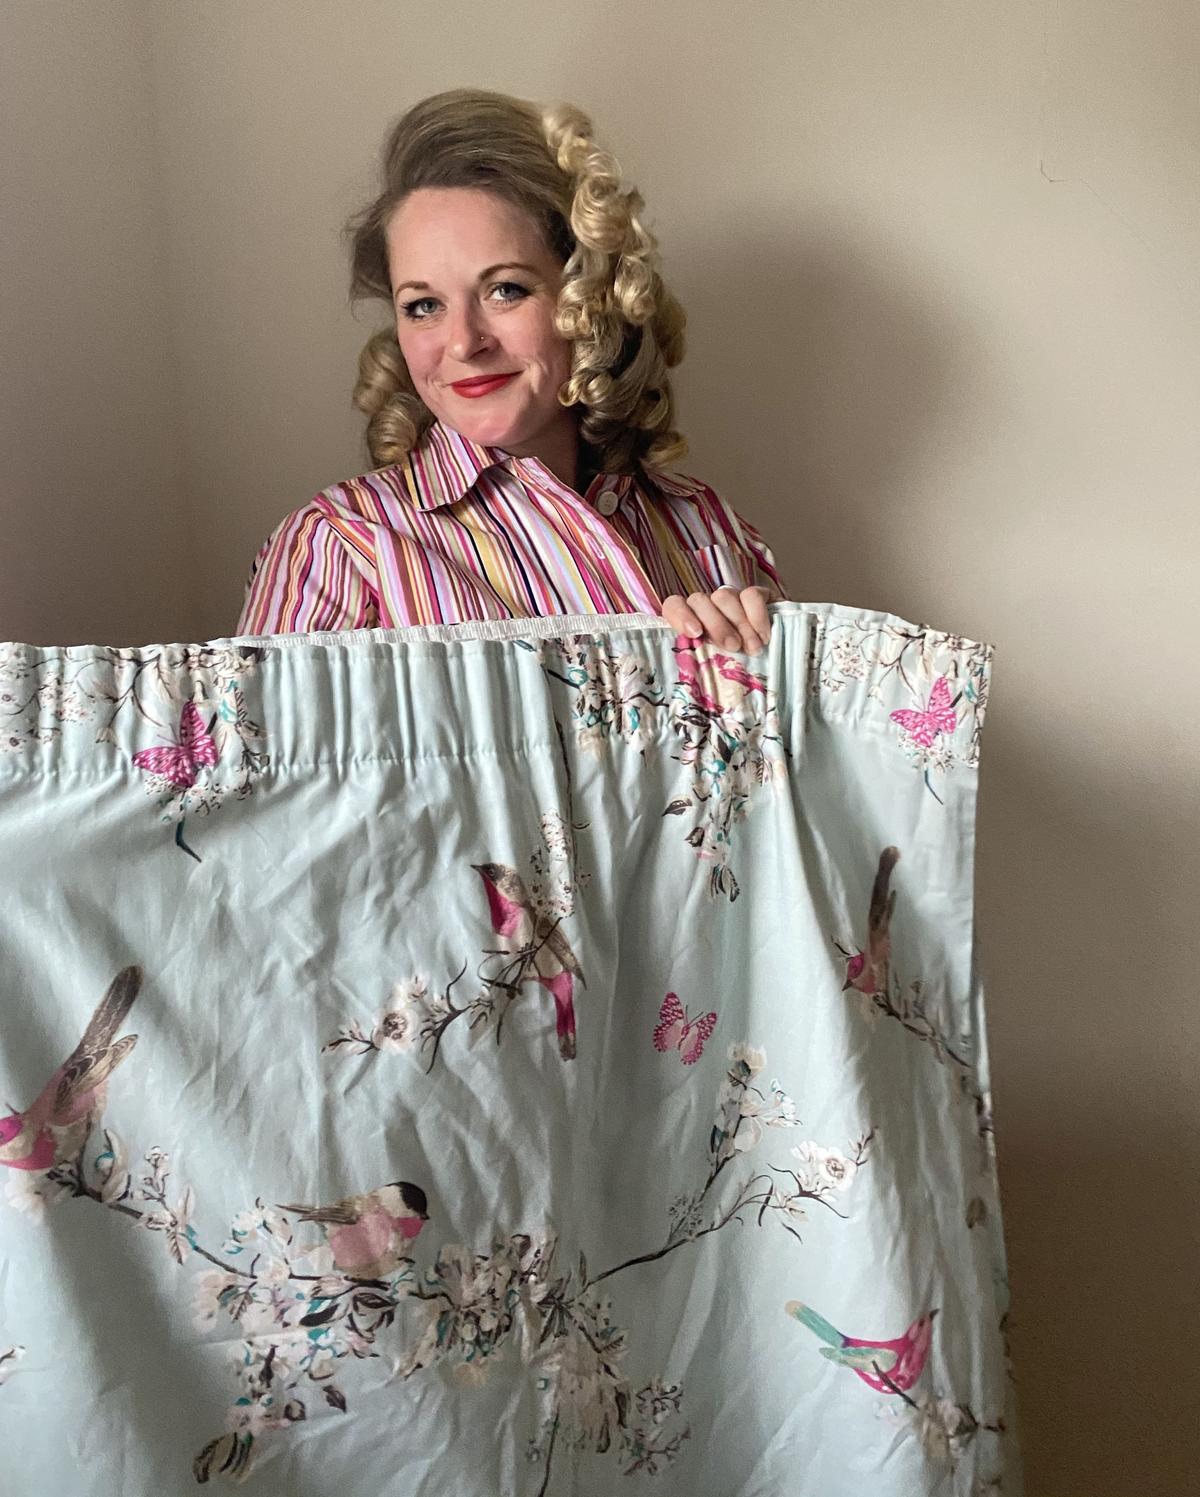 Rosie holding up some charity shop curtains she plans to make into an outfit. (Kennedy News and Media)